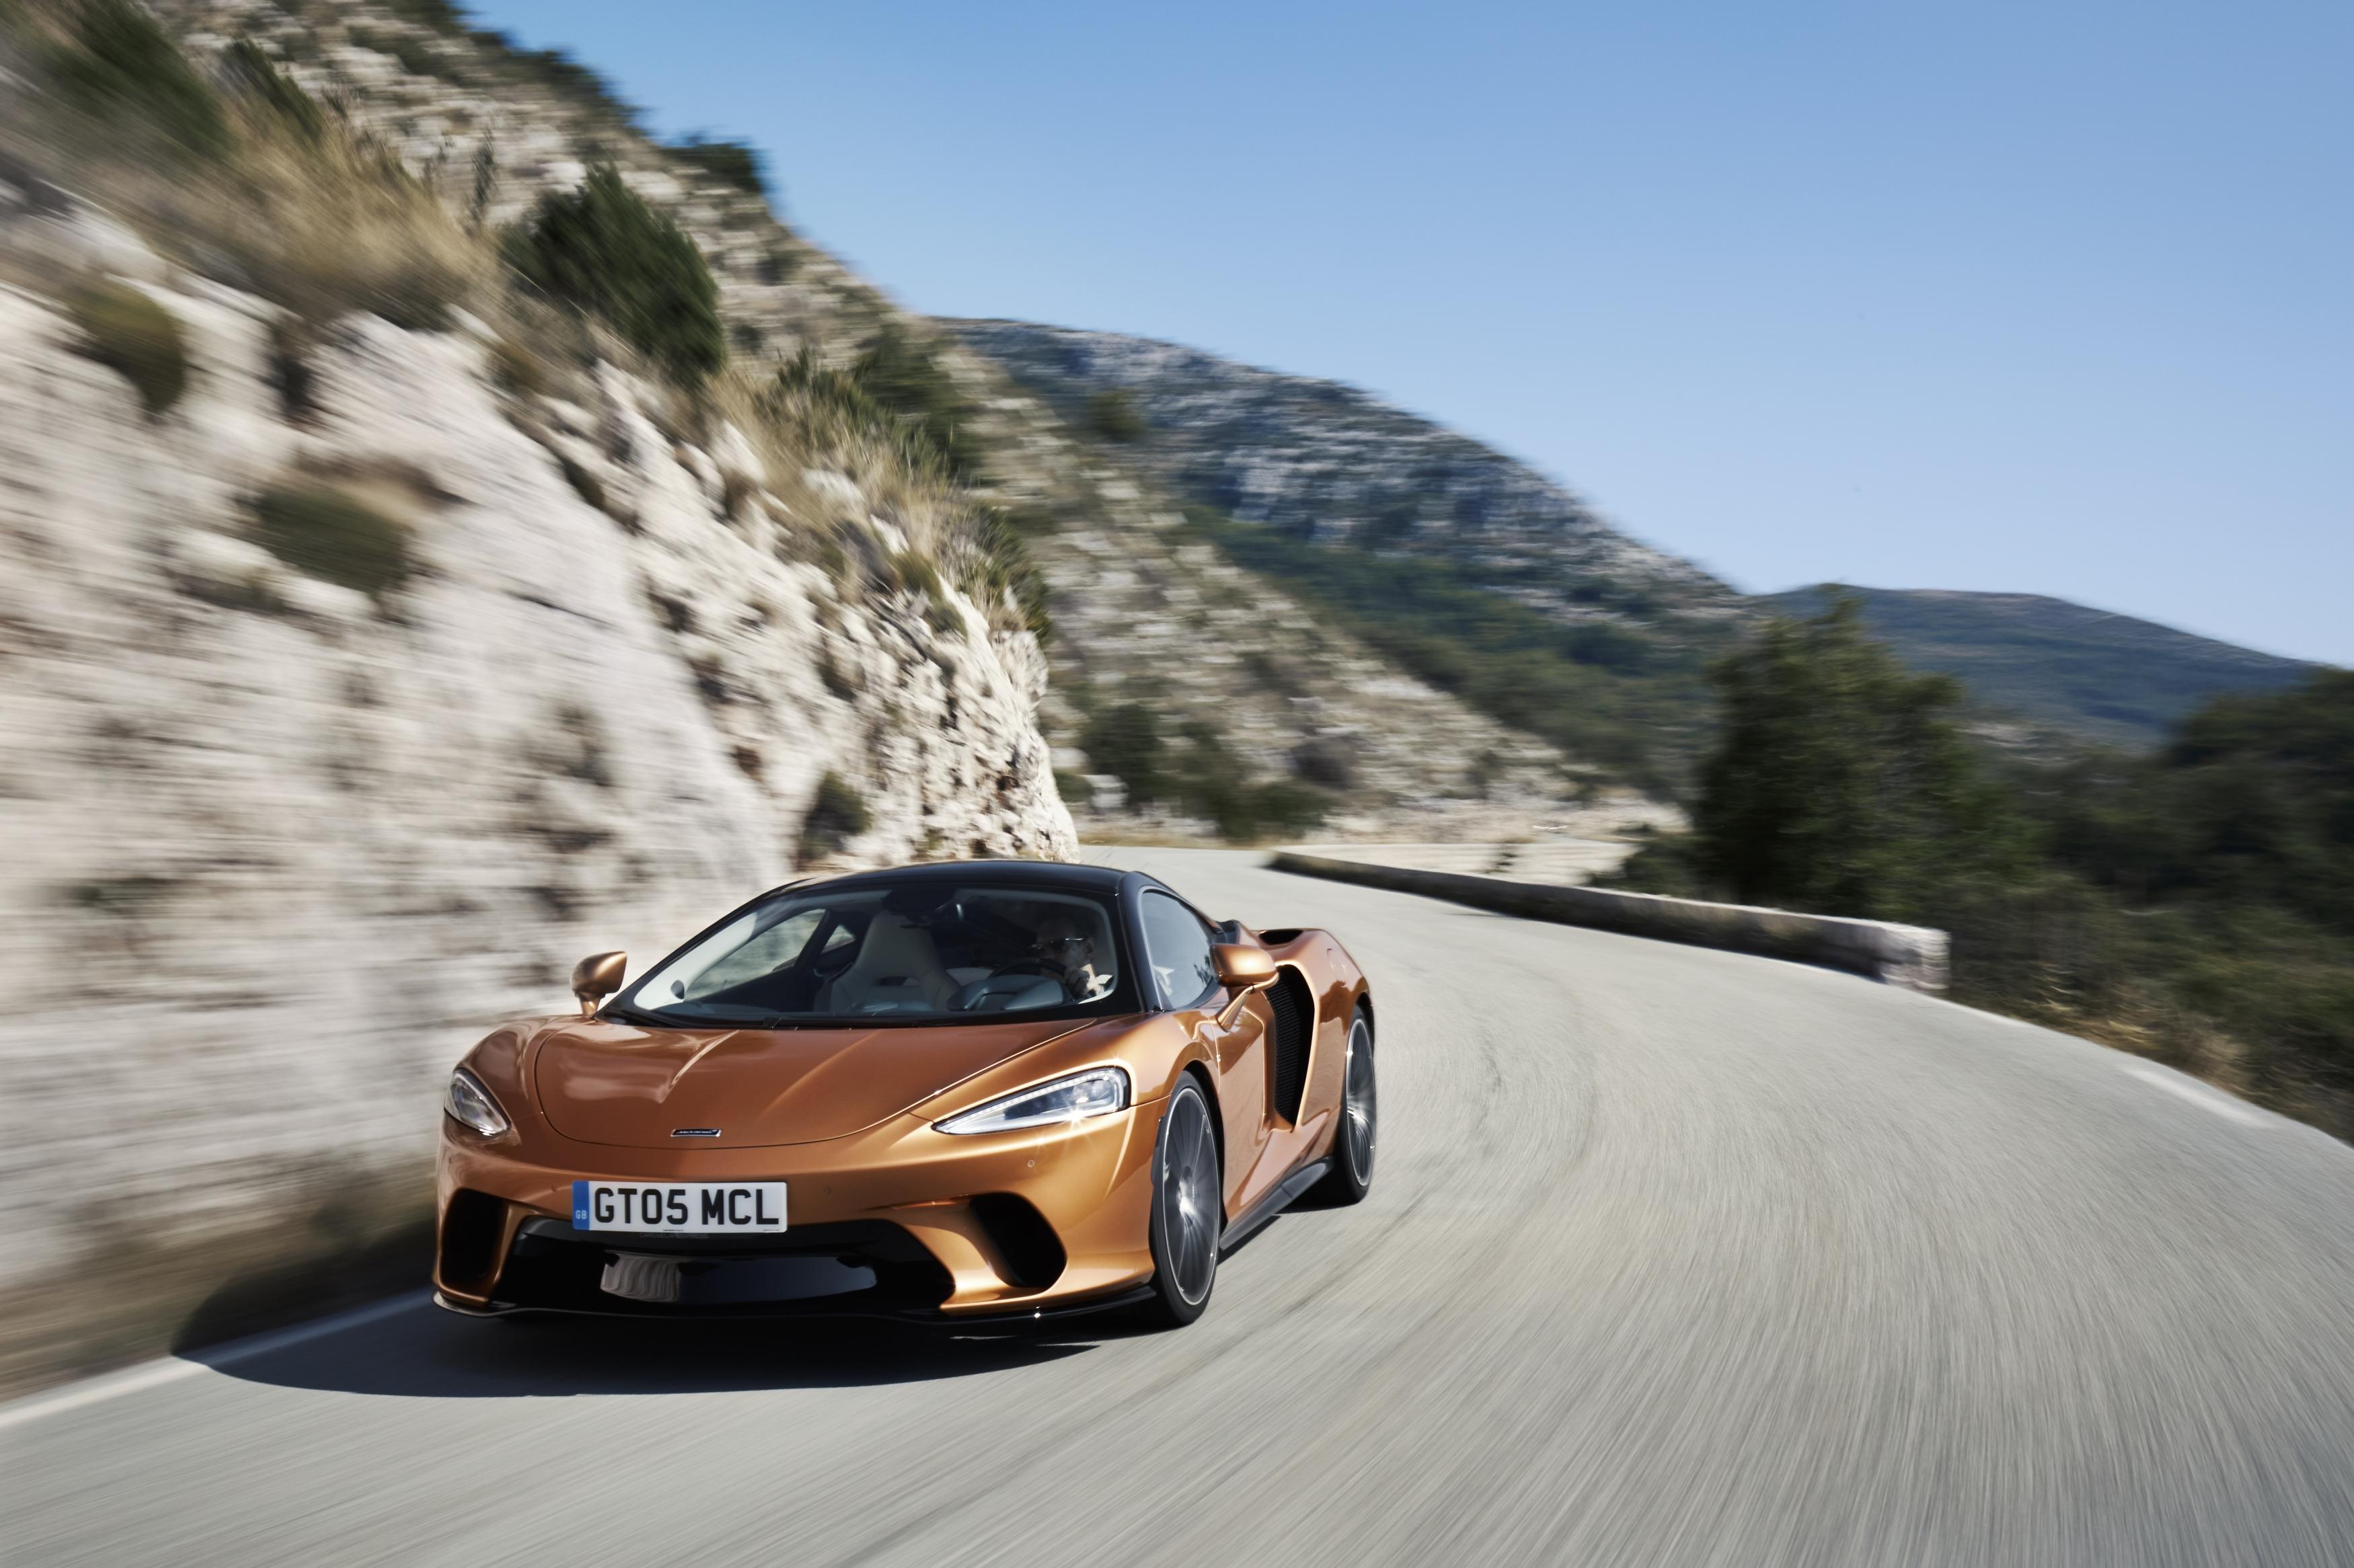 The 2022 GT is more luxurious than other McLaren models.